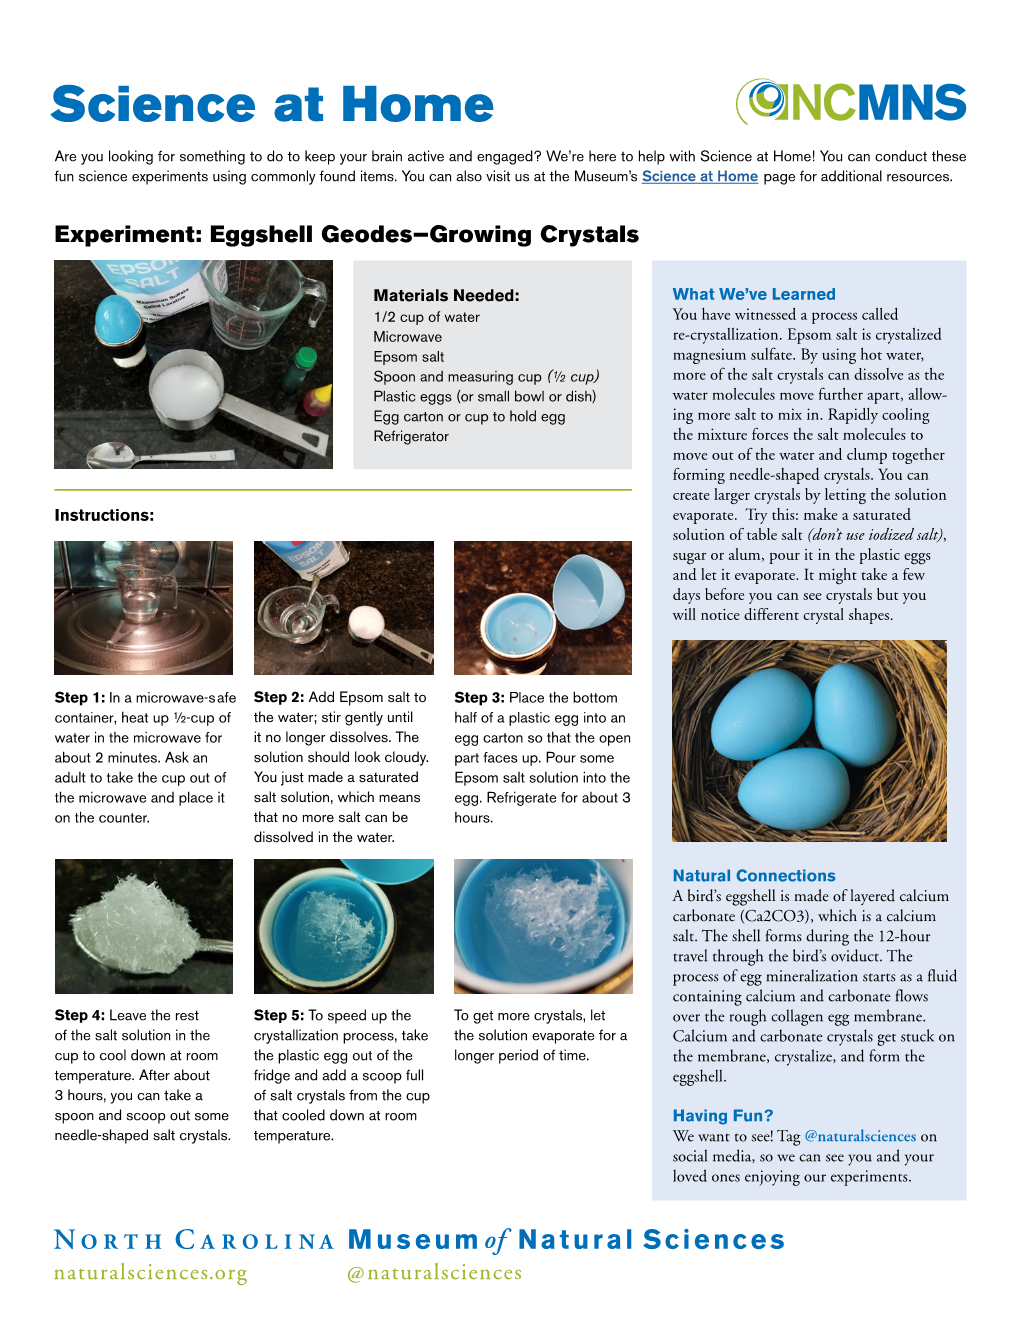 Eggshell Geodes—Growing Crystals